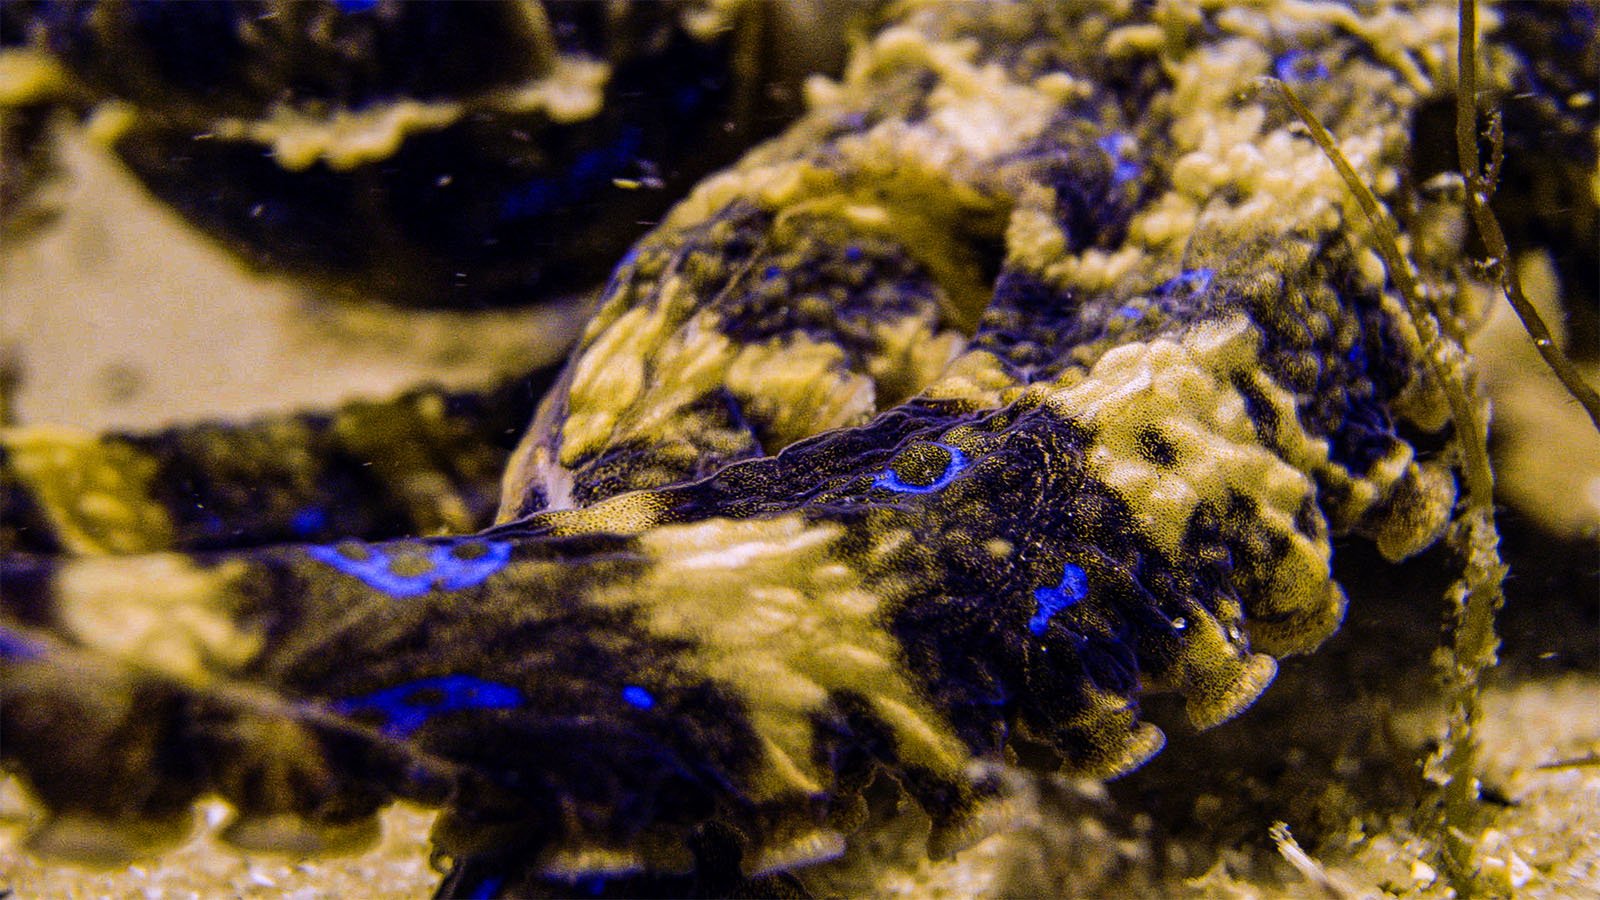 Close-up of a camouflaged stonefish lying on the sandy ocean floor, showing its textured and mottled skin with hints of vibrant blue spots.